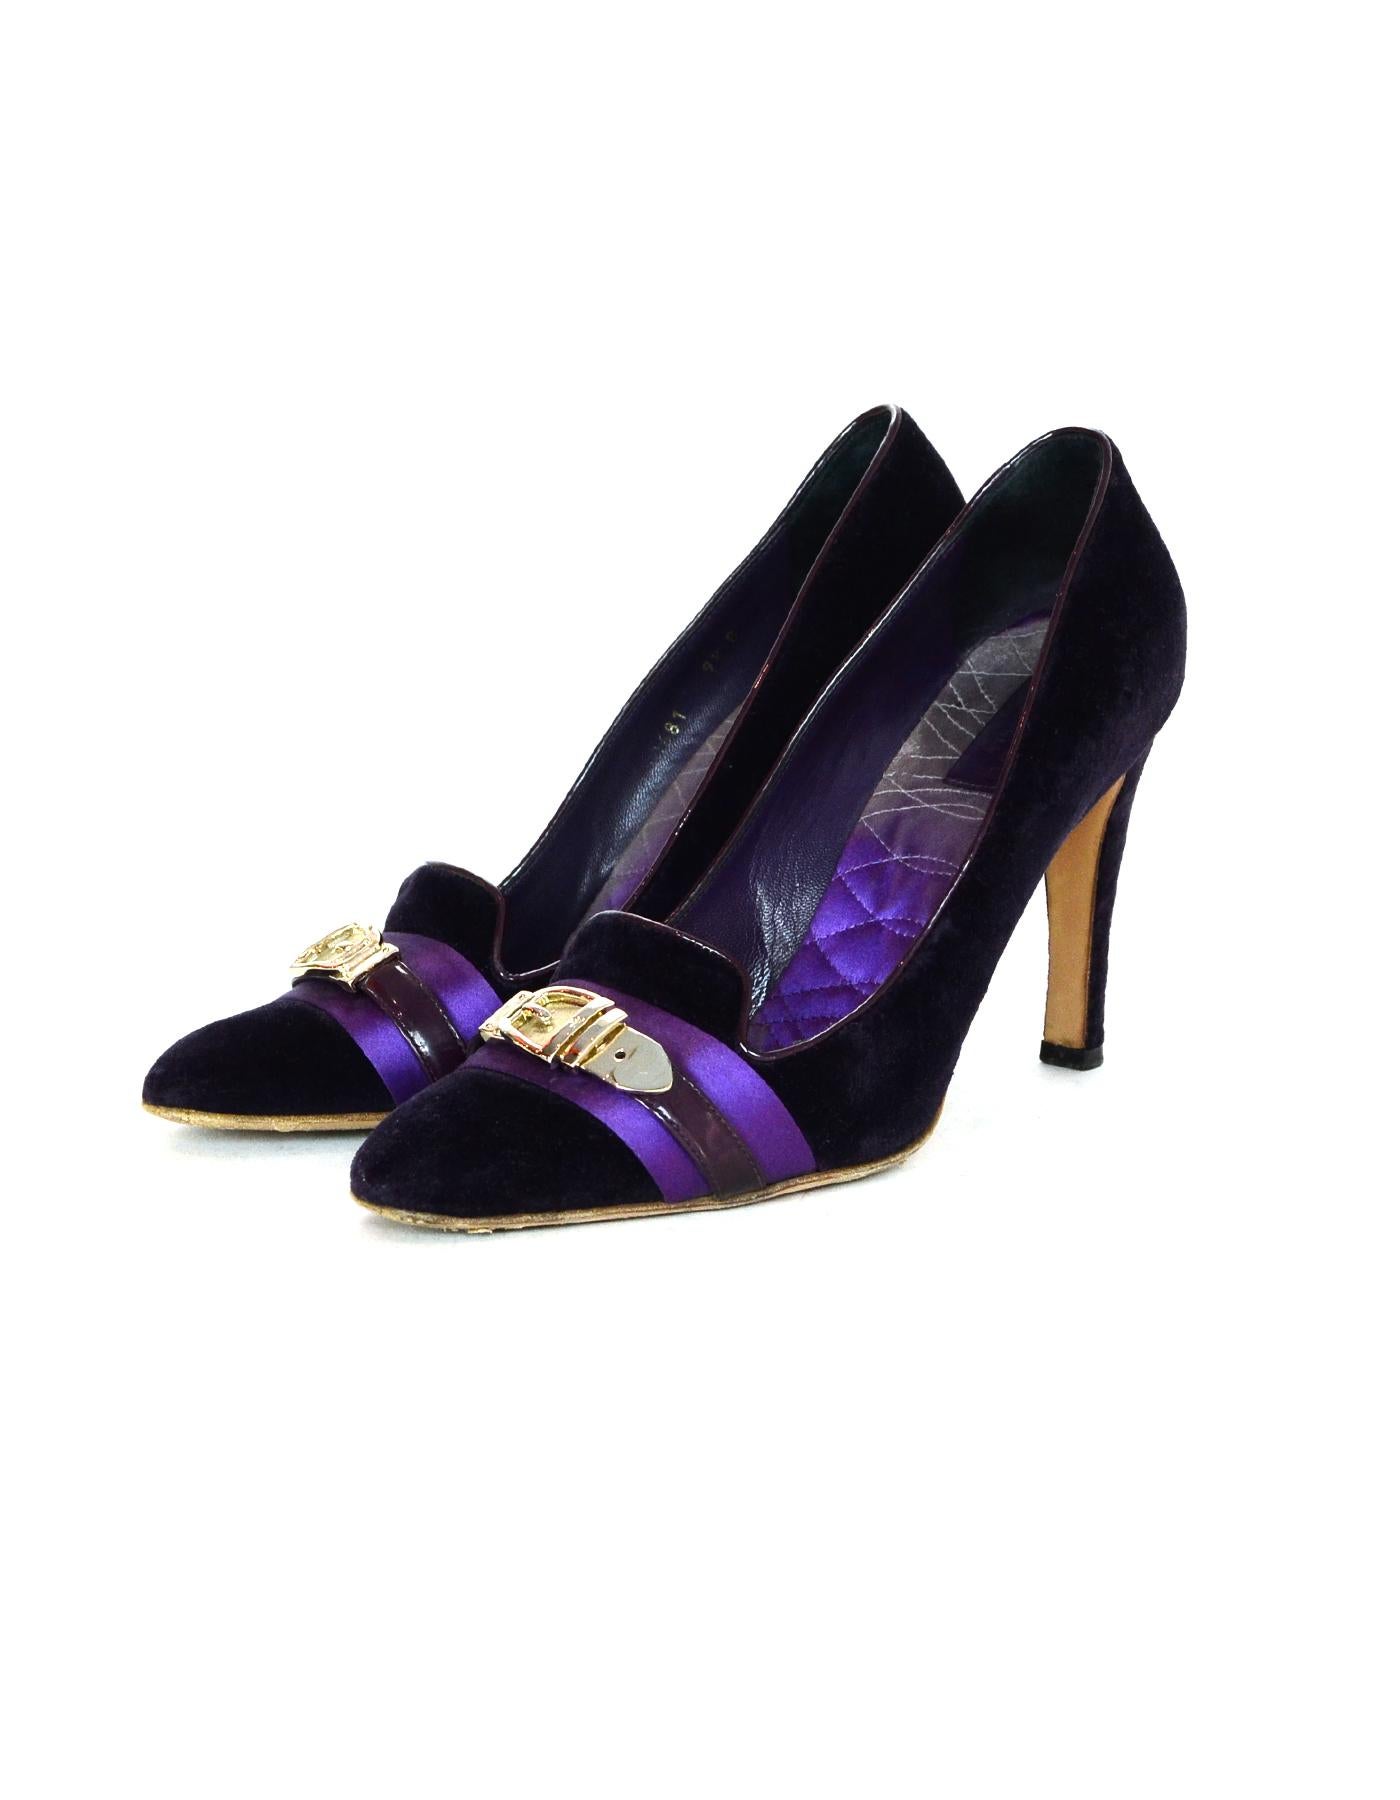 Gucci Purple Velvet Heels W/ Goldtone Buckle Sz 9.5

Made In: Italy
Color: Purple, gold
Hardware: Goldtone
Materials: Velvet, patent leather, metal, satin
Closure/Opening:  Slide on
Overall Condition: Good pre-owned condition with exception of some